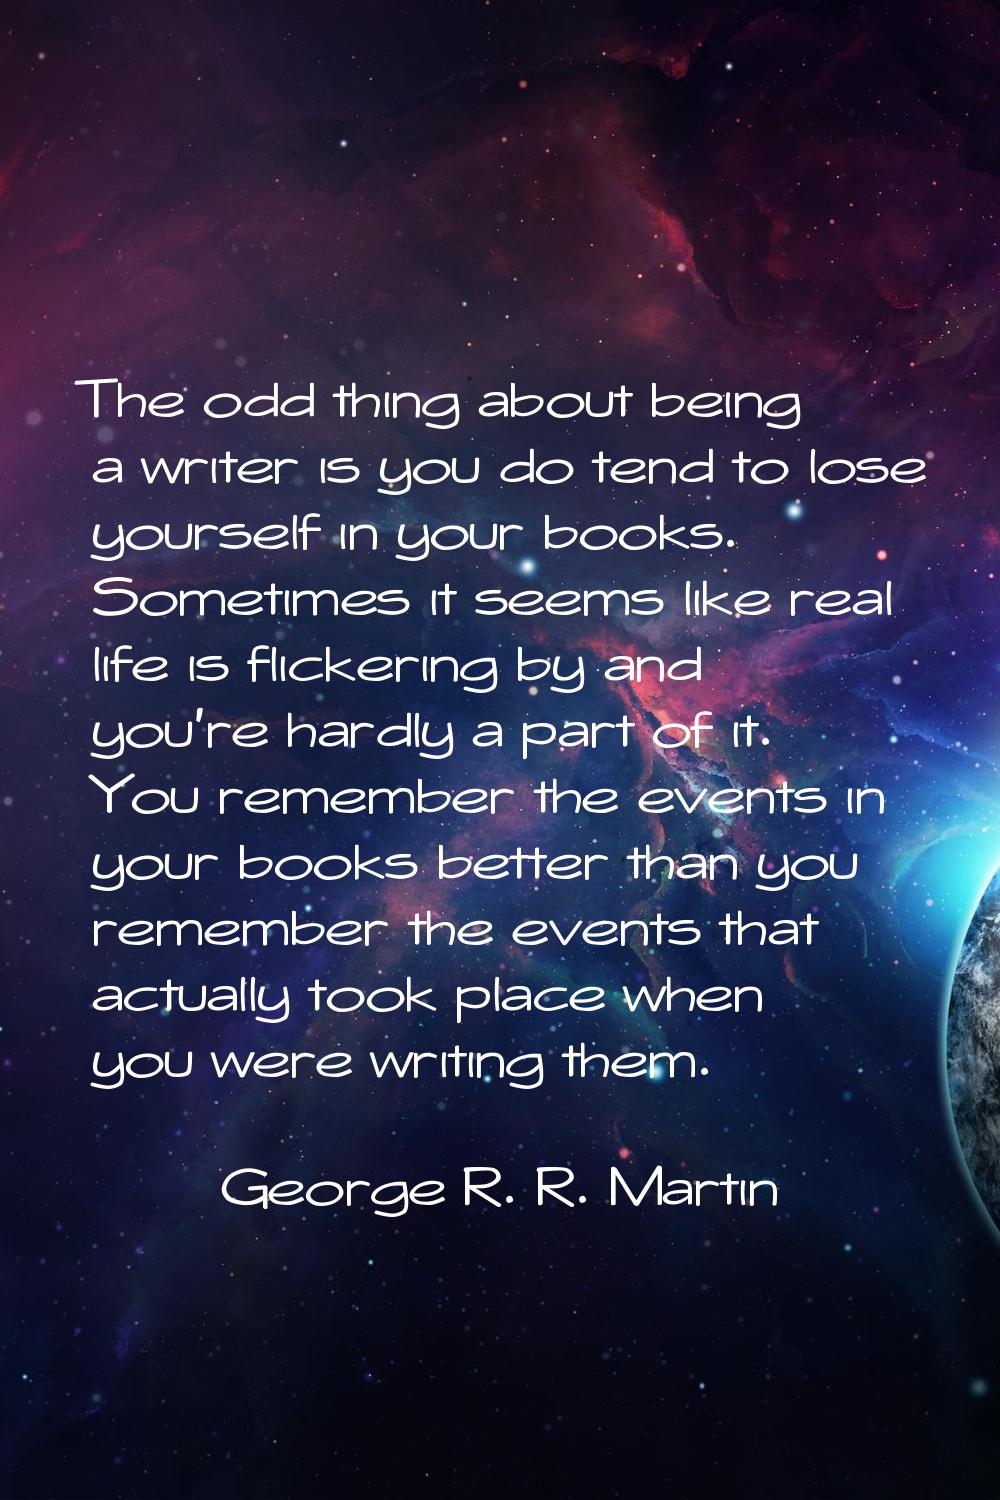 The odd thing about being a writer is you do tend to lose yourself in your books. Sometimes it seem